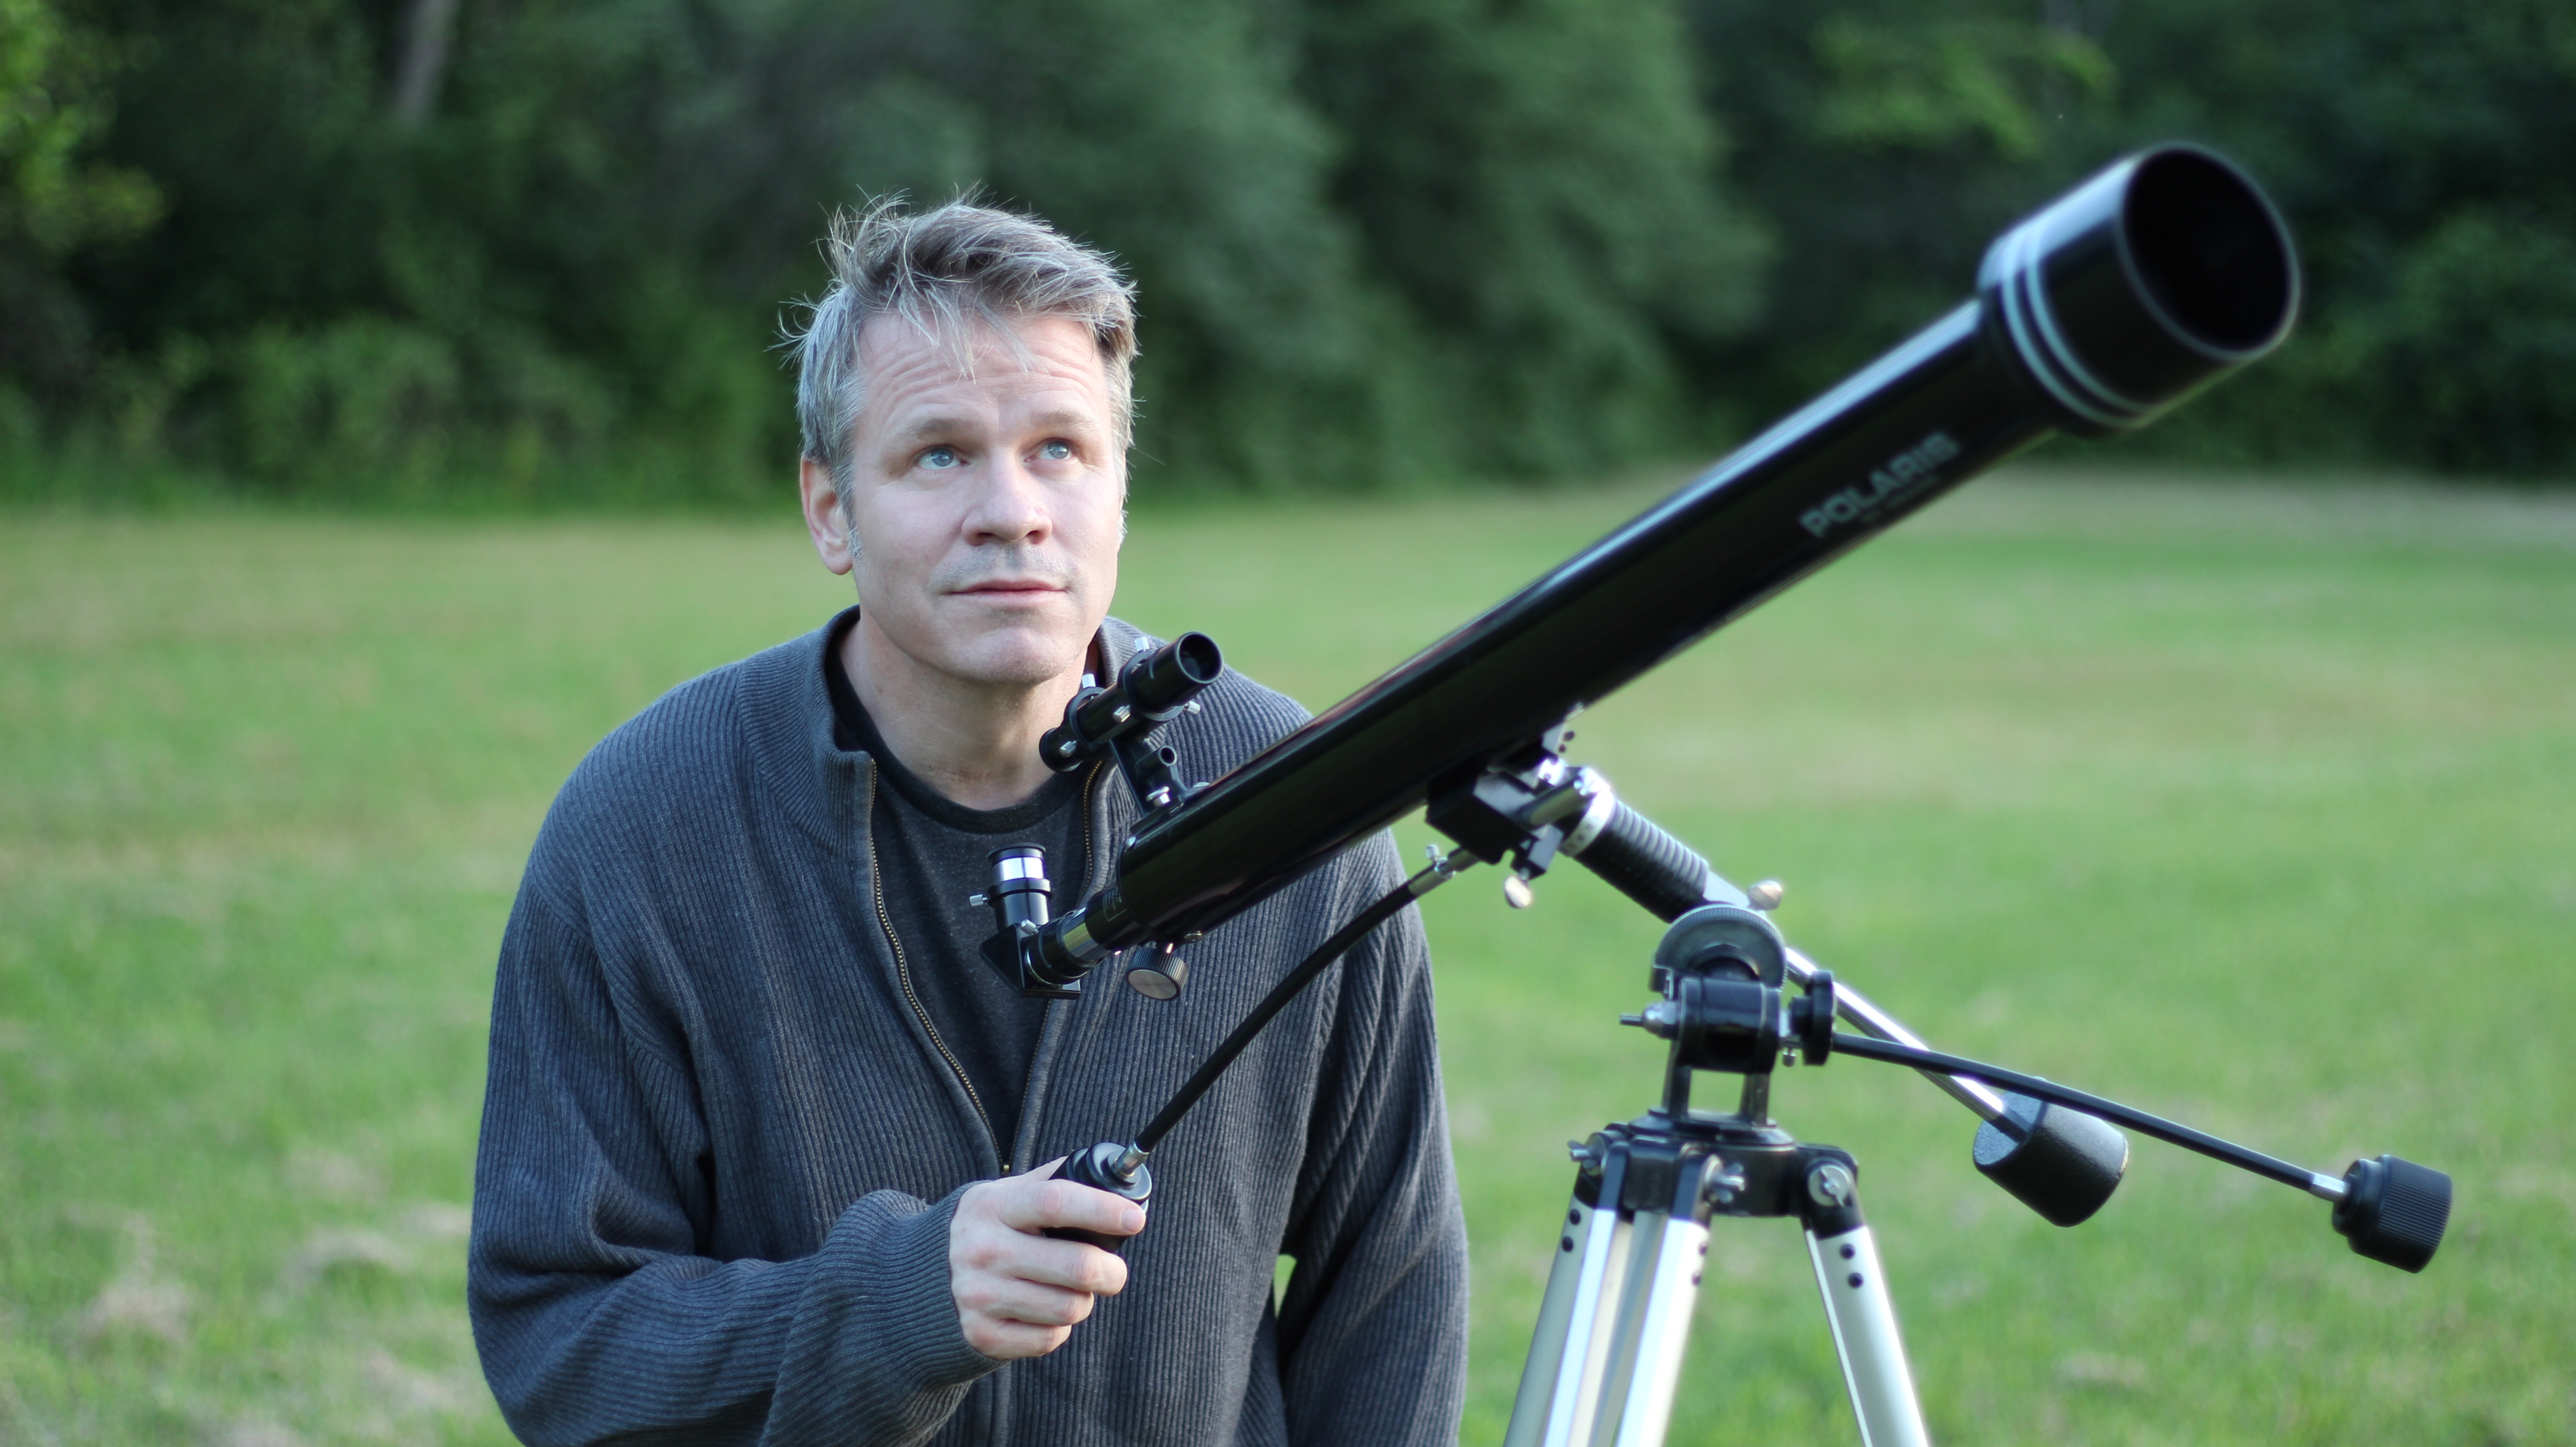 2nd Brad Peterson with telescope on location during "what the open heart allows" music video film-shoot